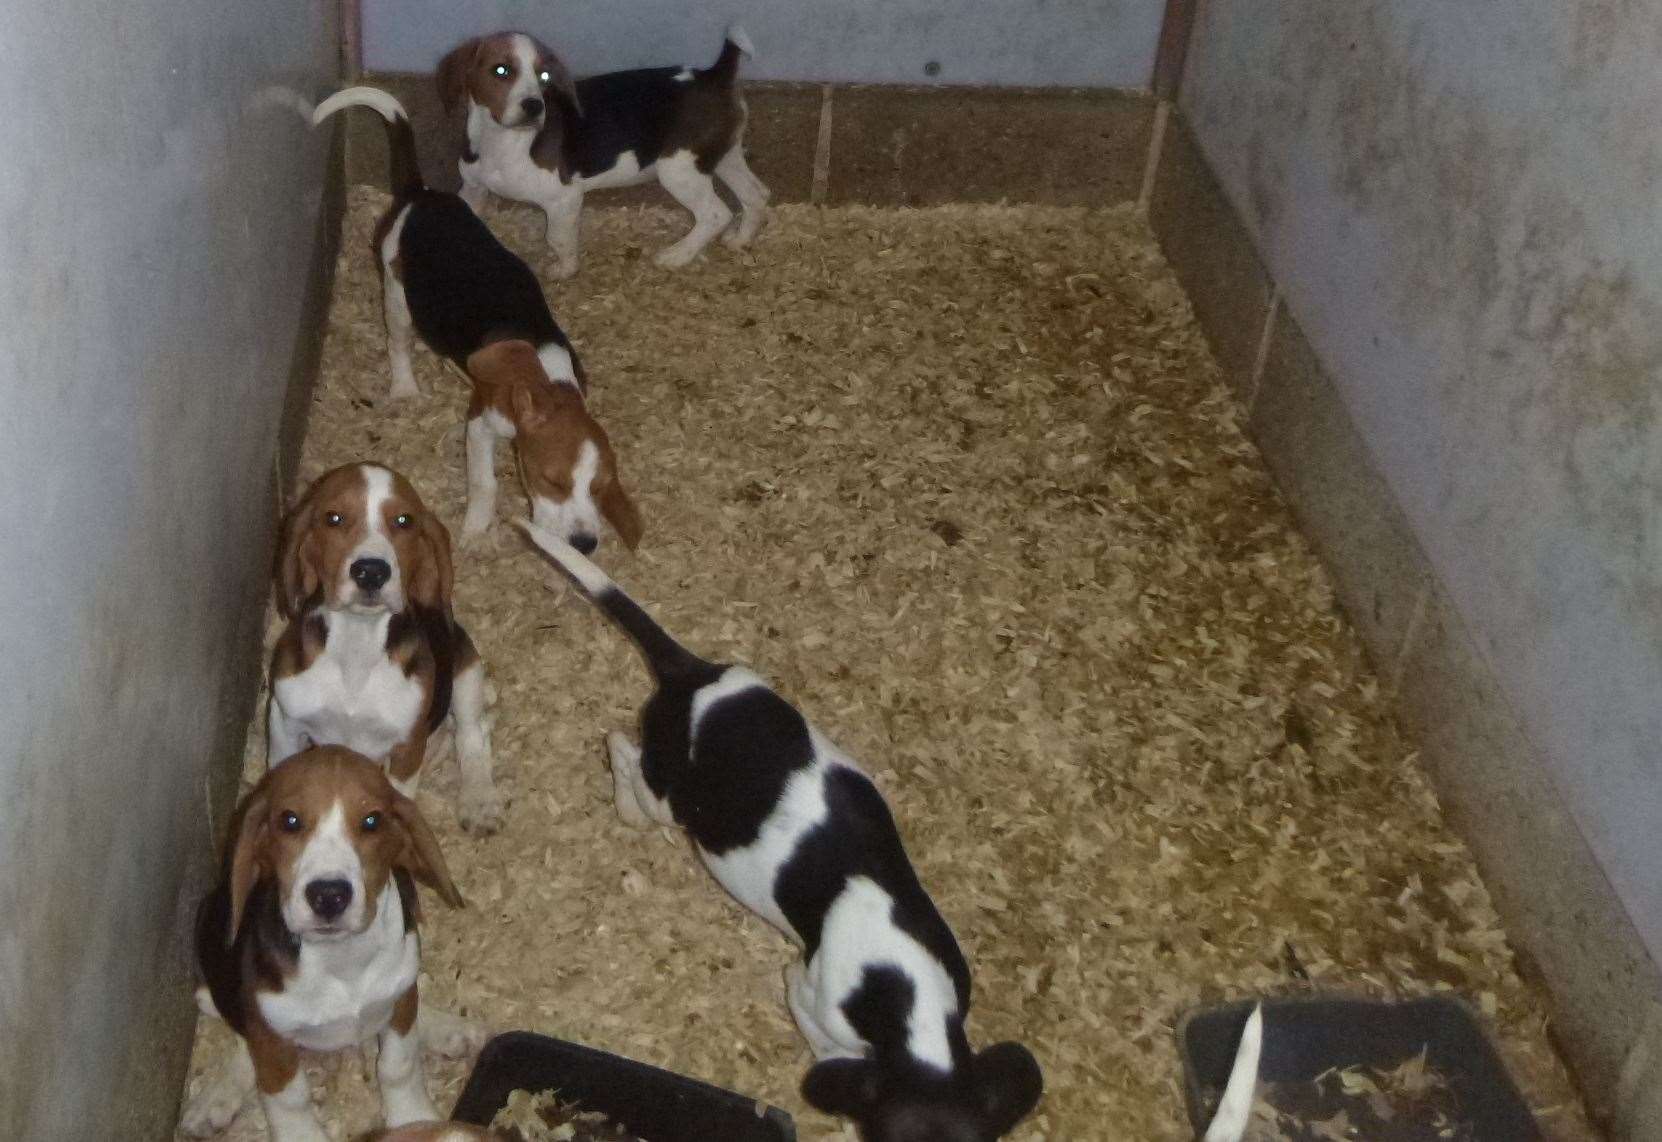 In total, 18 dogs, including spaniels, were seized from the Longfield property in 2018. Picture: RSPCA